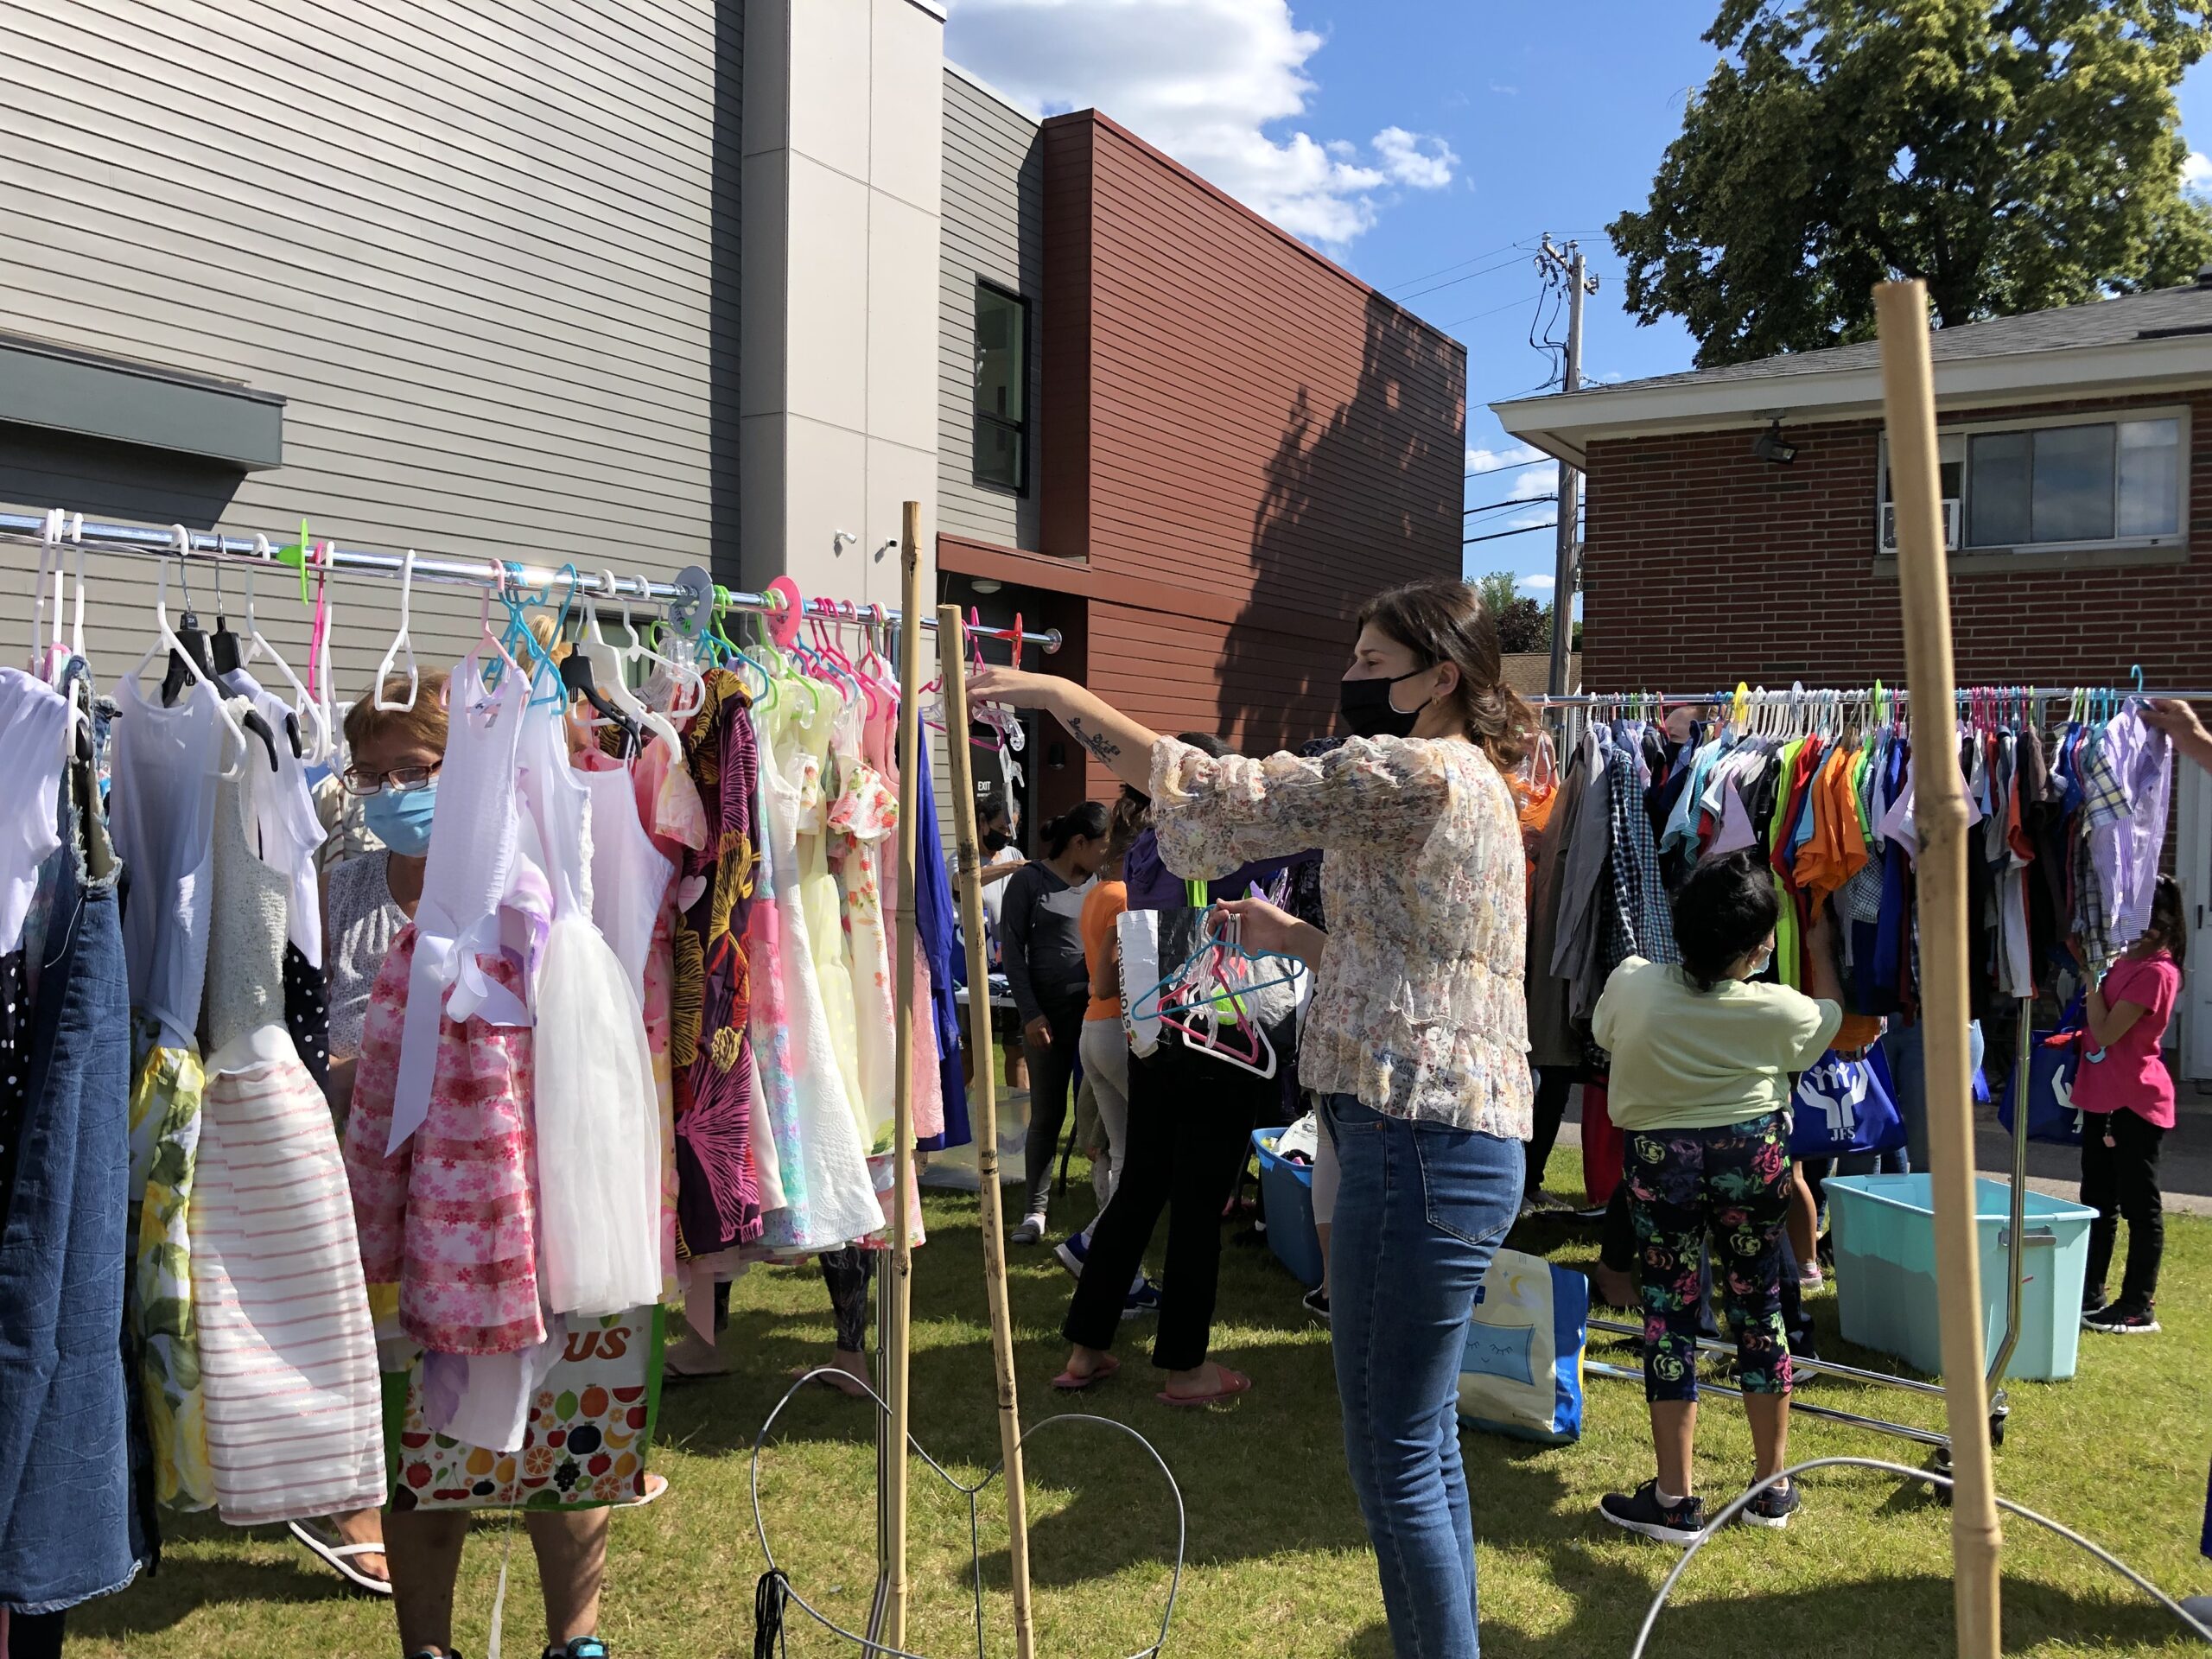 JFS Hosts Pop-Up Clothing Shop; Many Thanks to our Volunteers